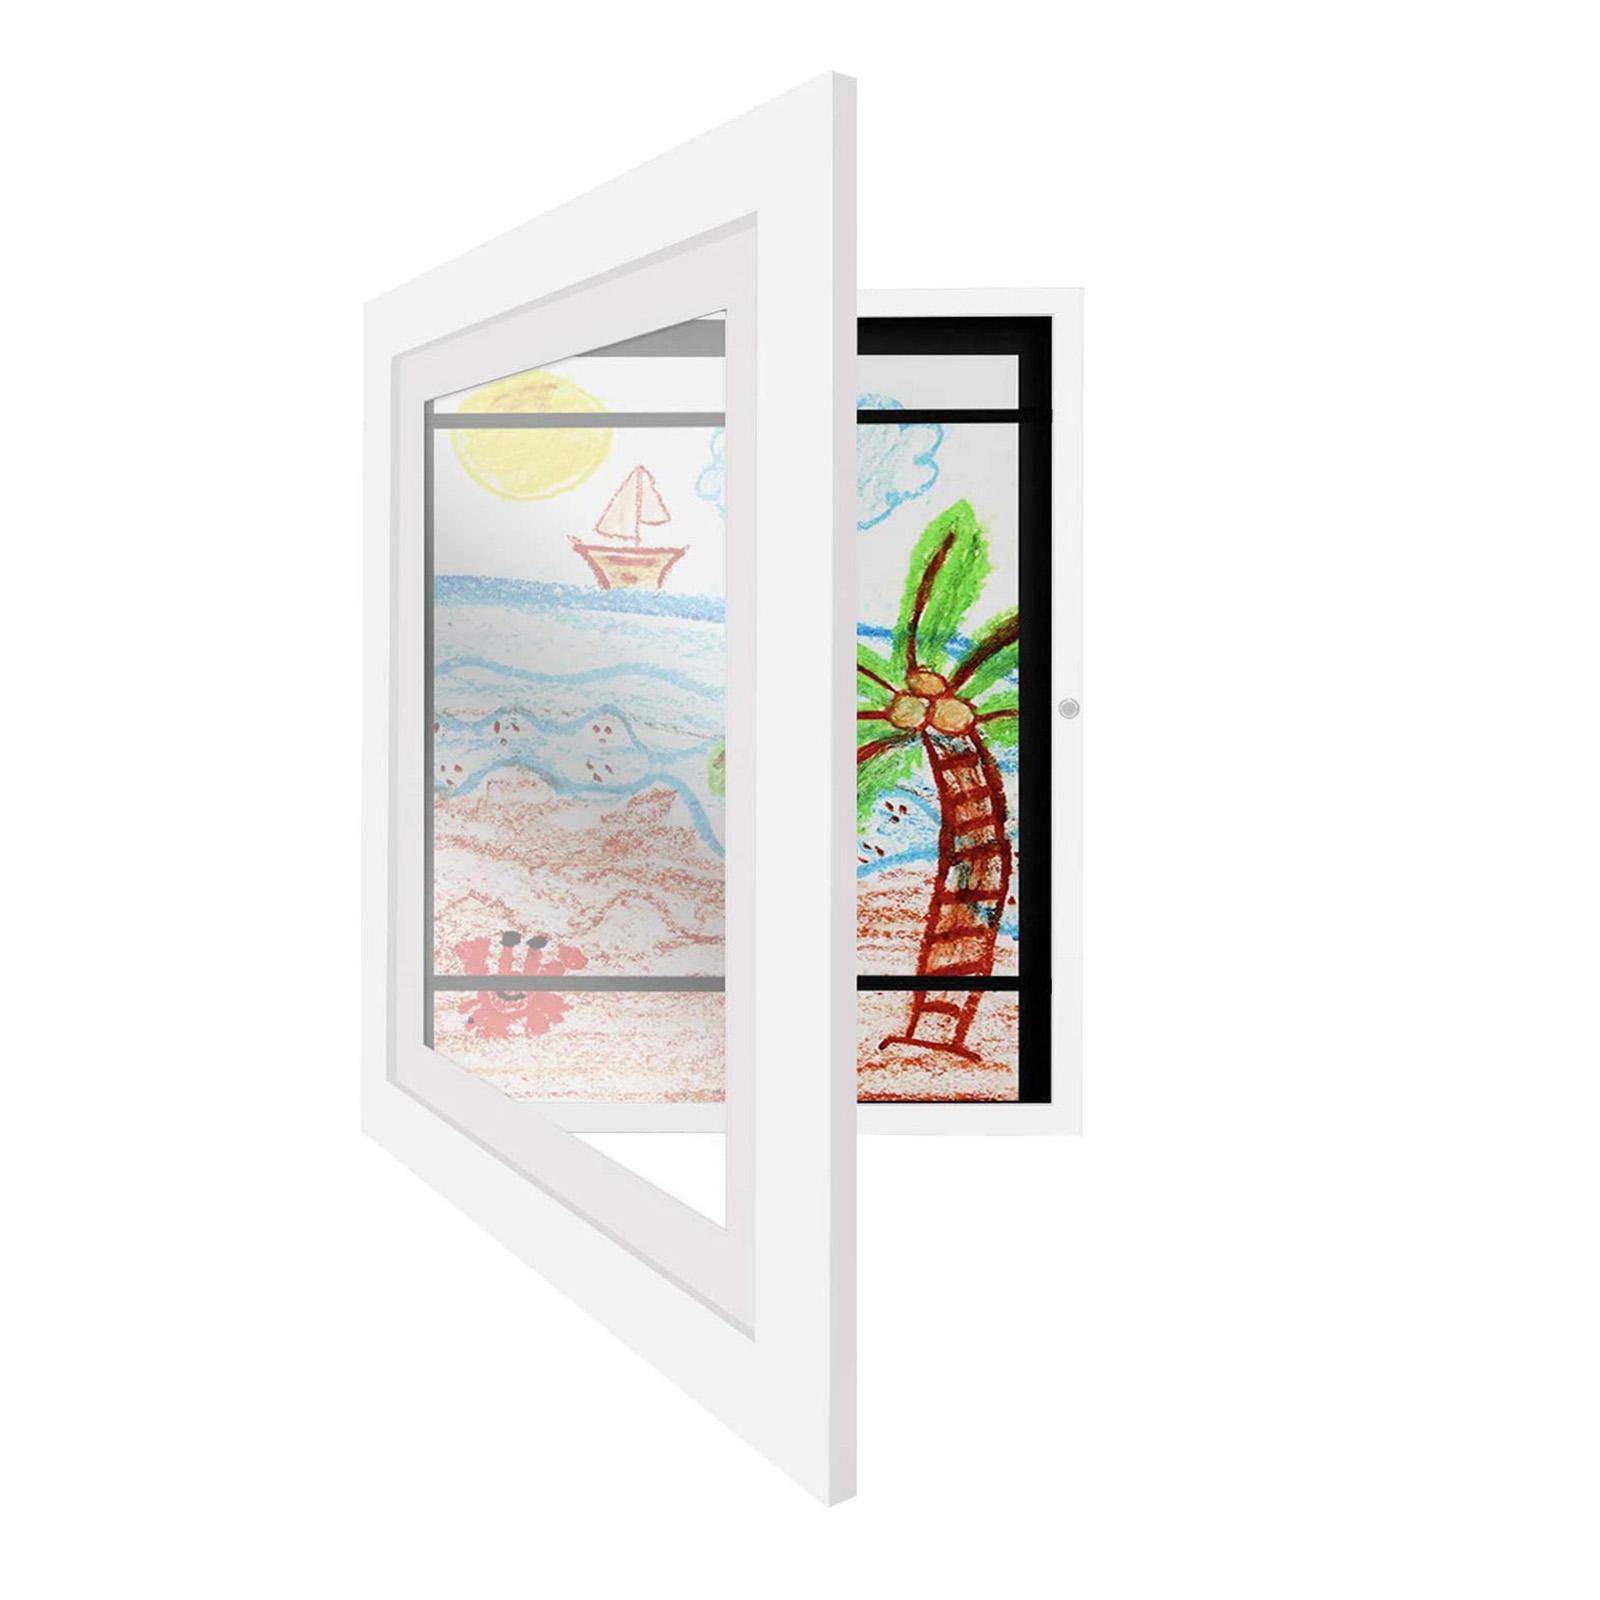 Kids Artwork Frame Kids Artwork Display for Wall Front Opening with Glass White